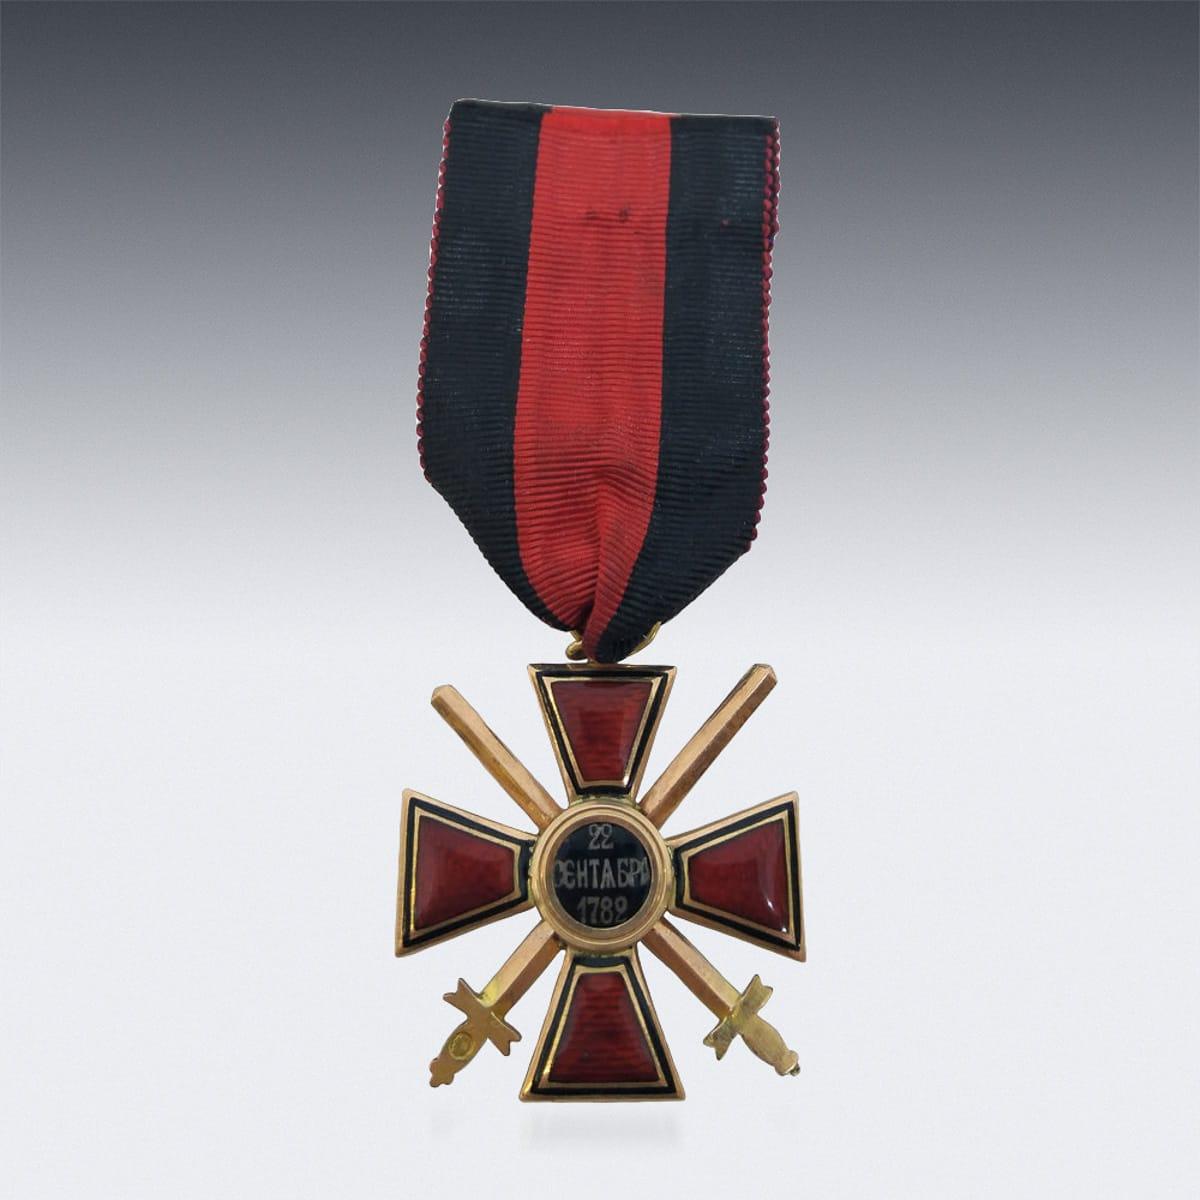 Antique early 20th century Russian Imperial order of St Vladimir, 4th Class (Military Division), the cross covered in translucent red enamel, the front with a coat of arms of St.Vladimir and reverse dated (22nd September 1789). Hallmarked Russian